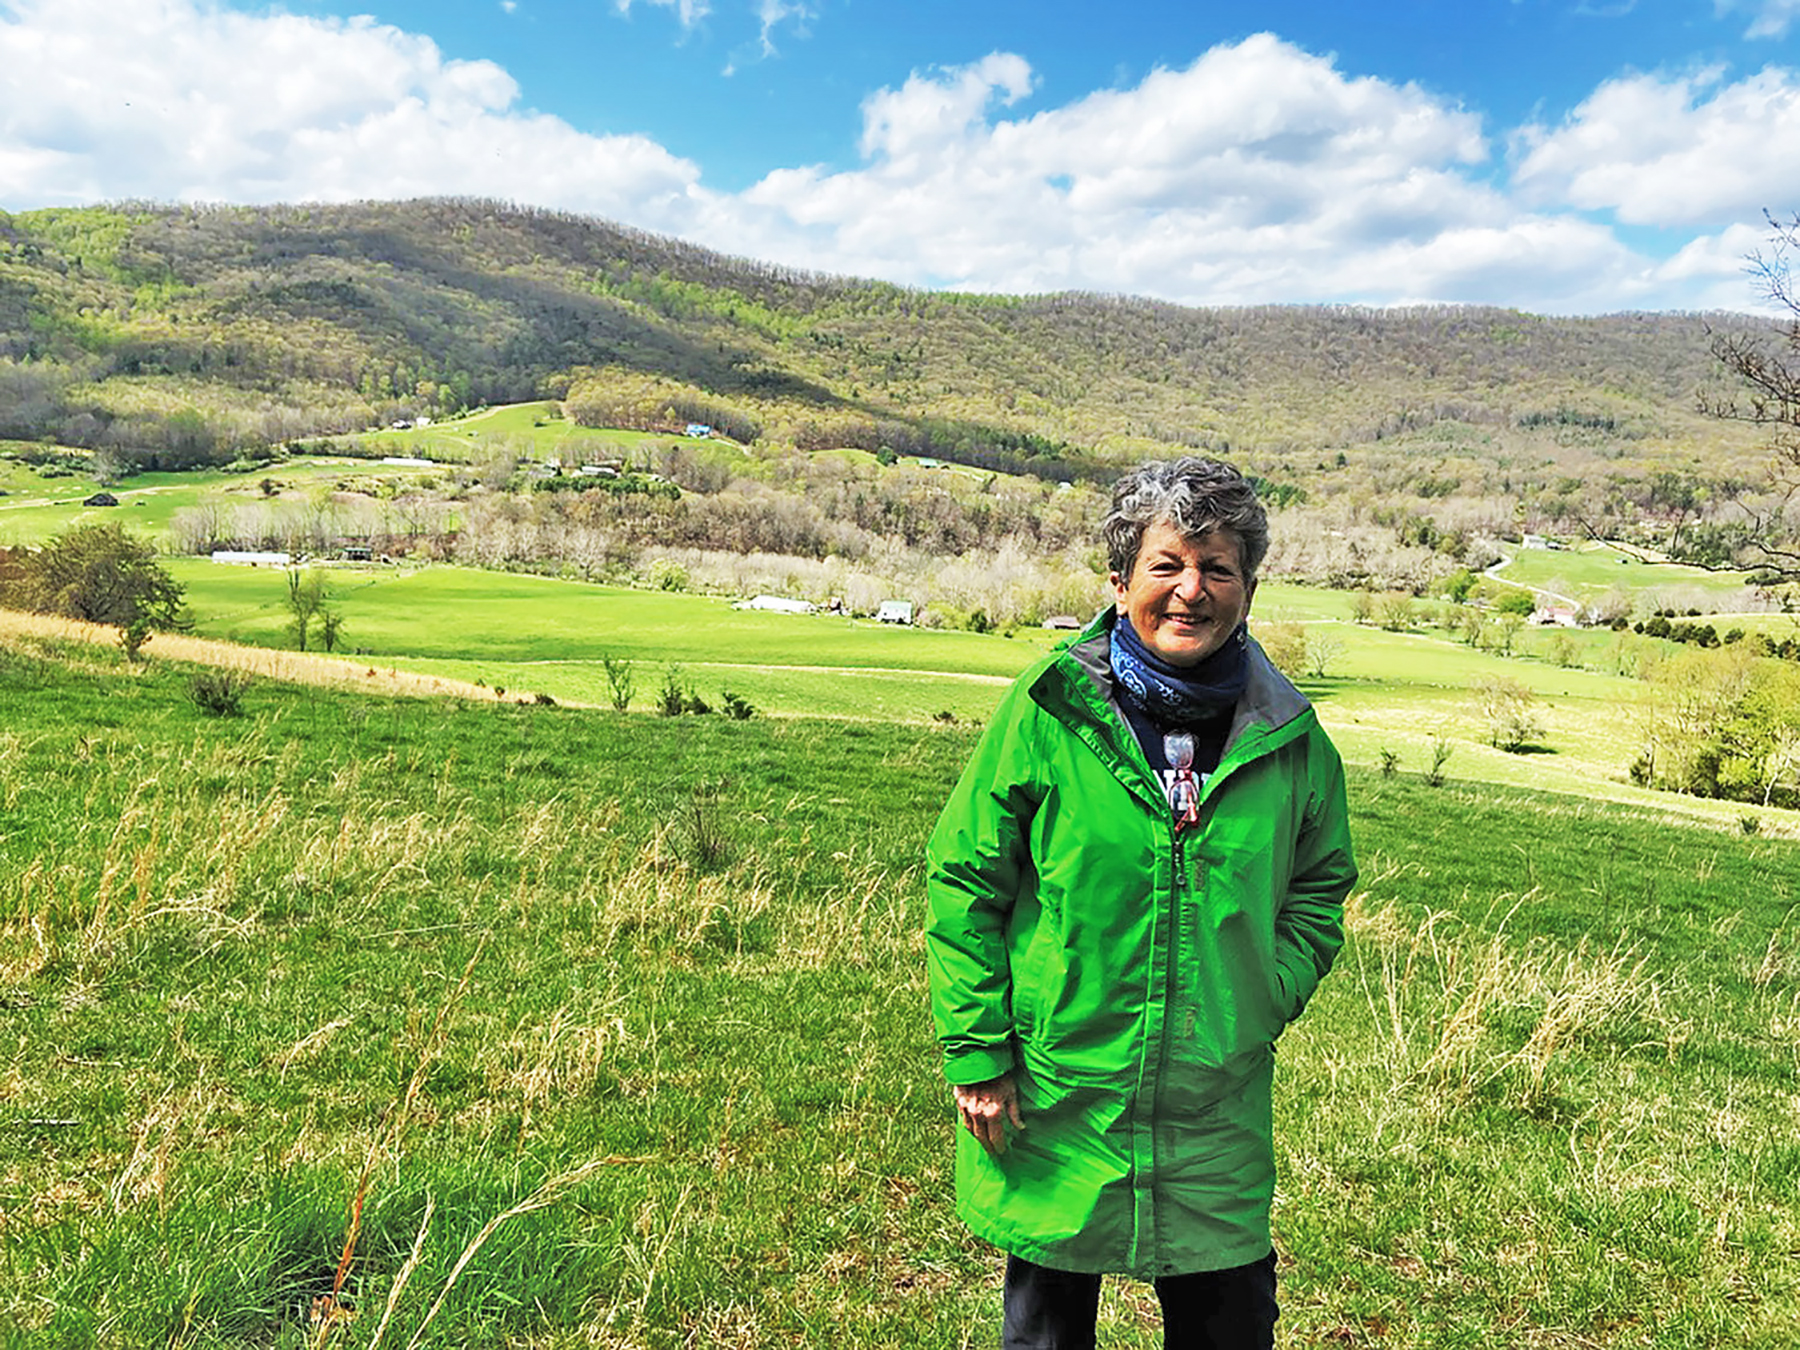 A woman with short, graying hair wearing pants and a long, green jacket stands in a pasture with fields and rolling hills behind her.